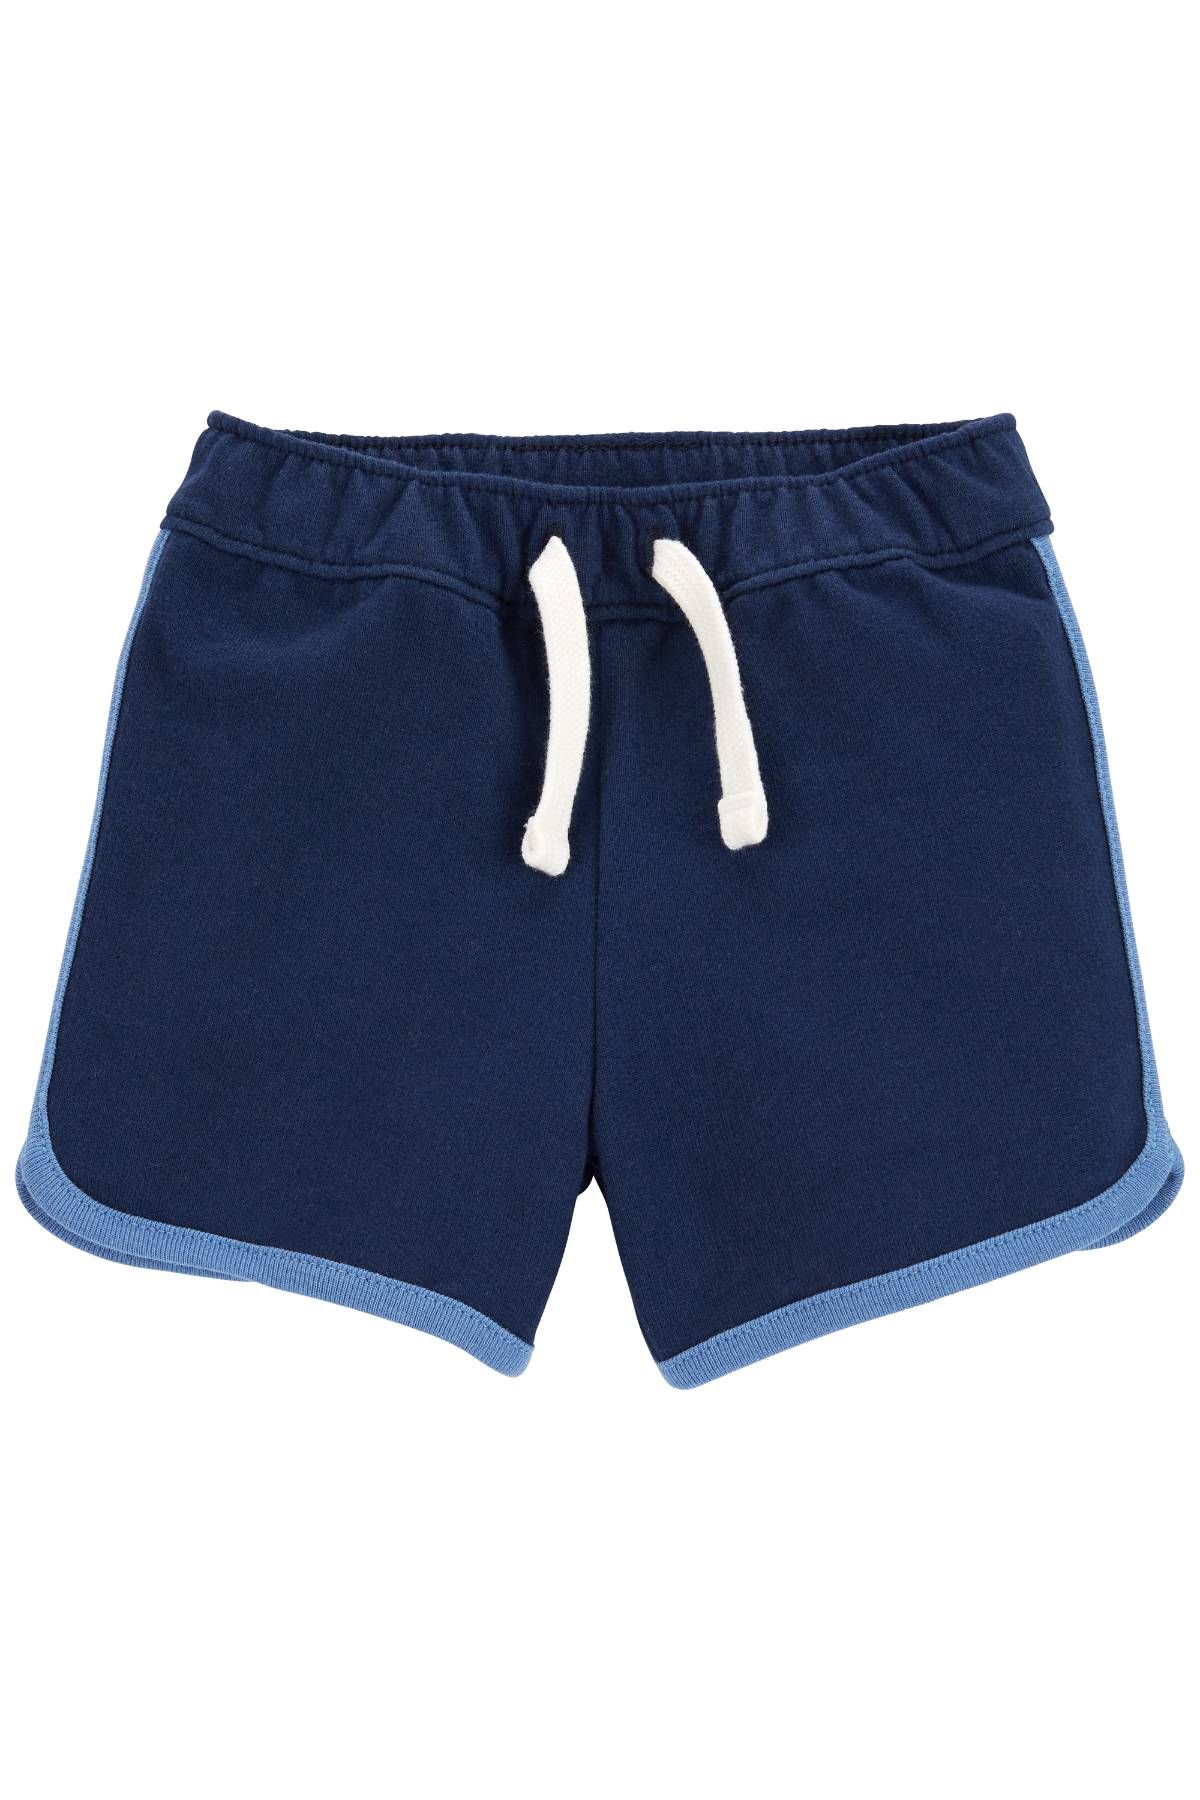 Carter's: Buy One Get One Free Underwear, Socks & More + Free Shipping On  All Orders